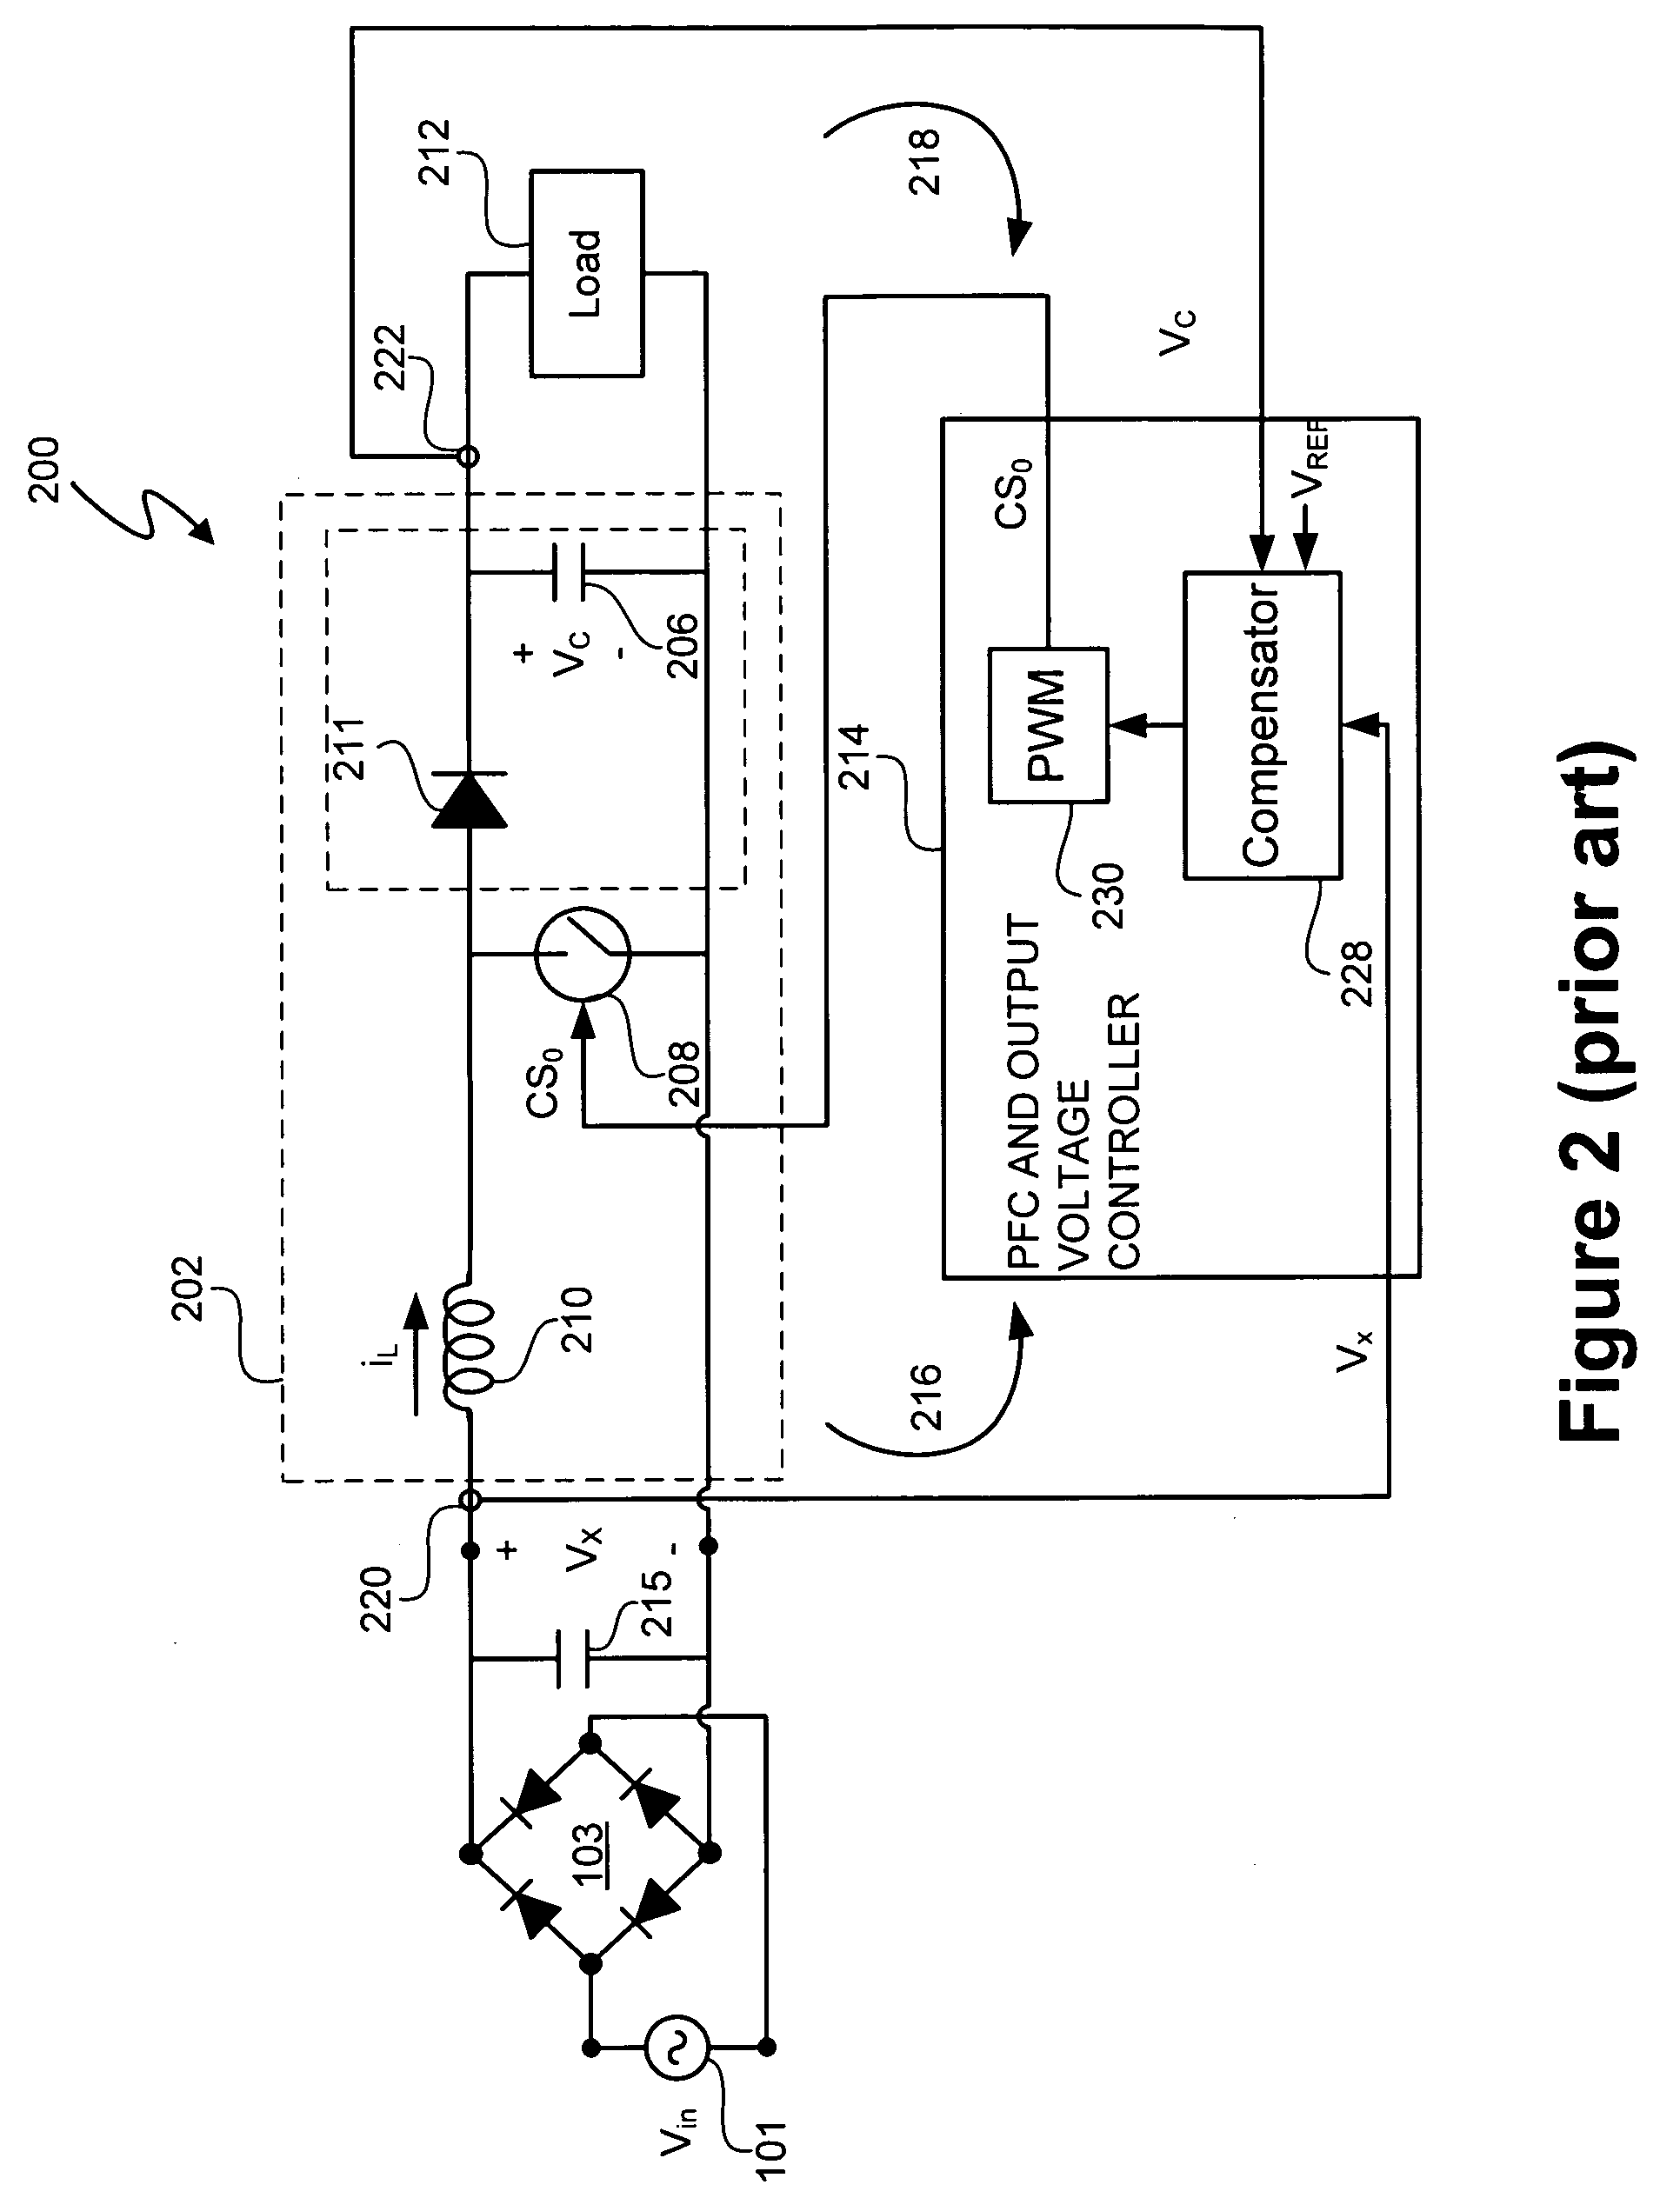 Power control system for current regulated light sources